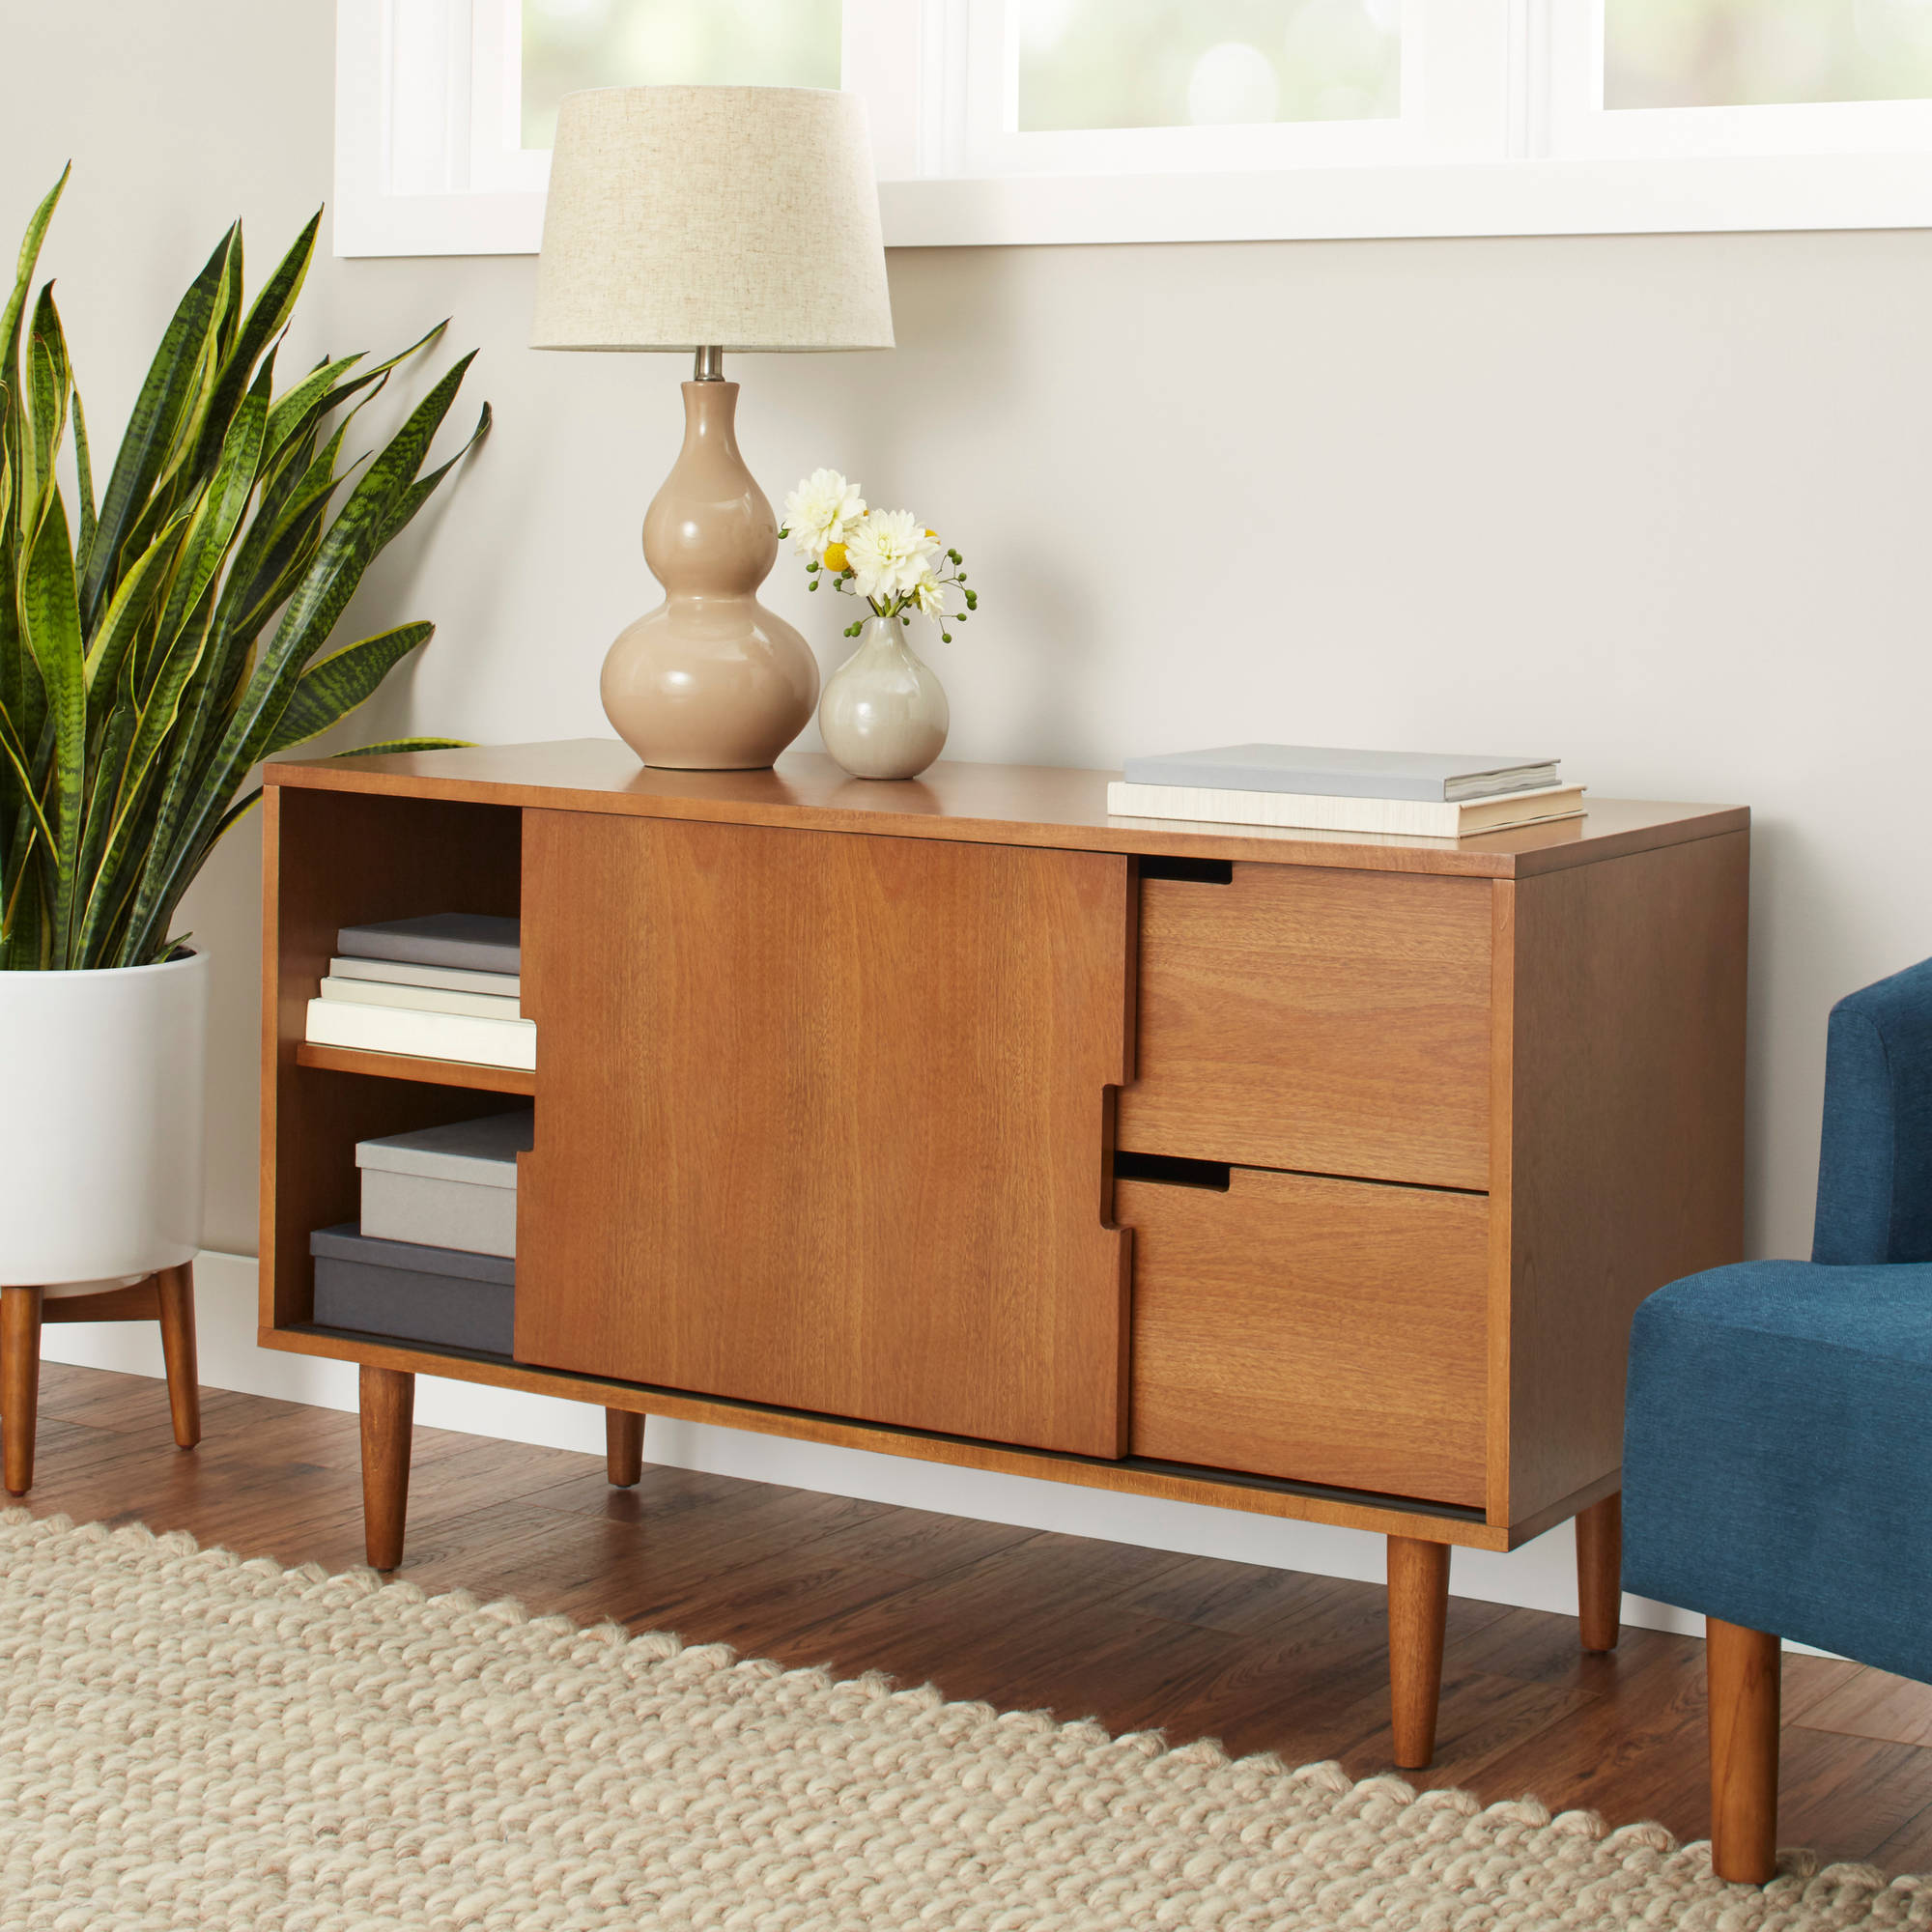 Better Homes and Gardens Flynn Mid Century Modern Credenza, Pecan - image 3 of 4